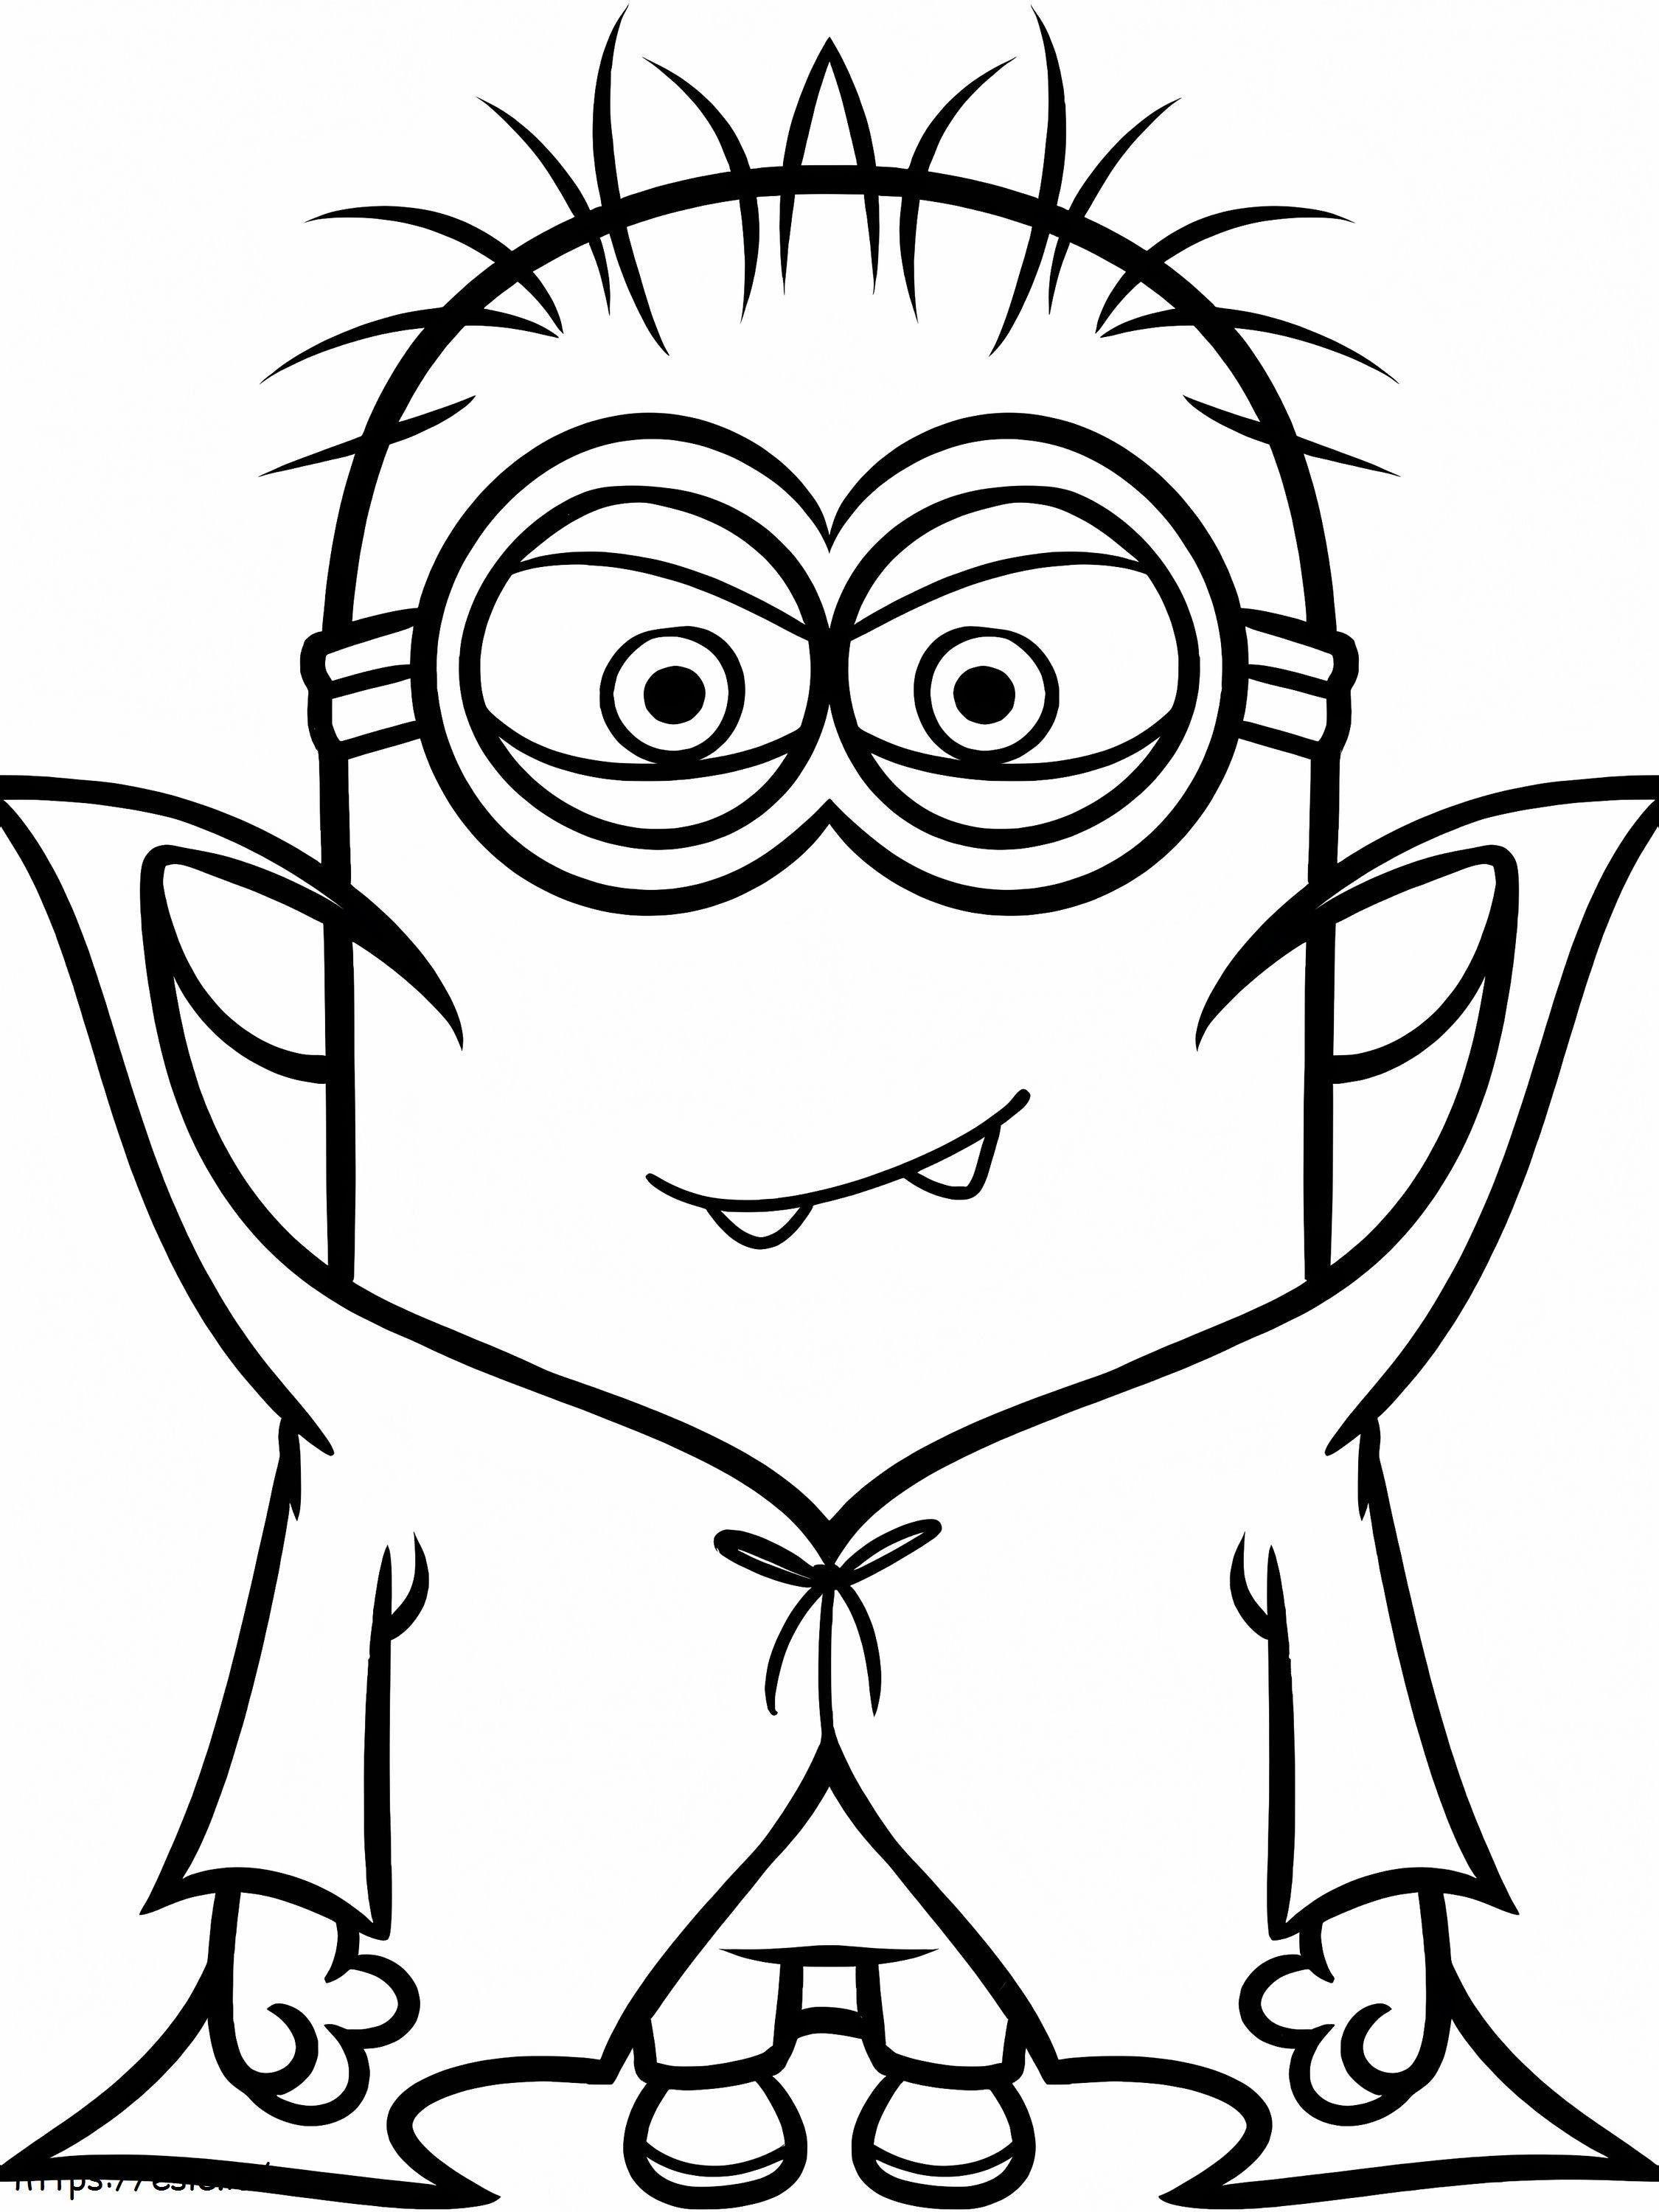 Minion Of Dracula coloring page